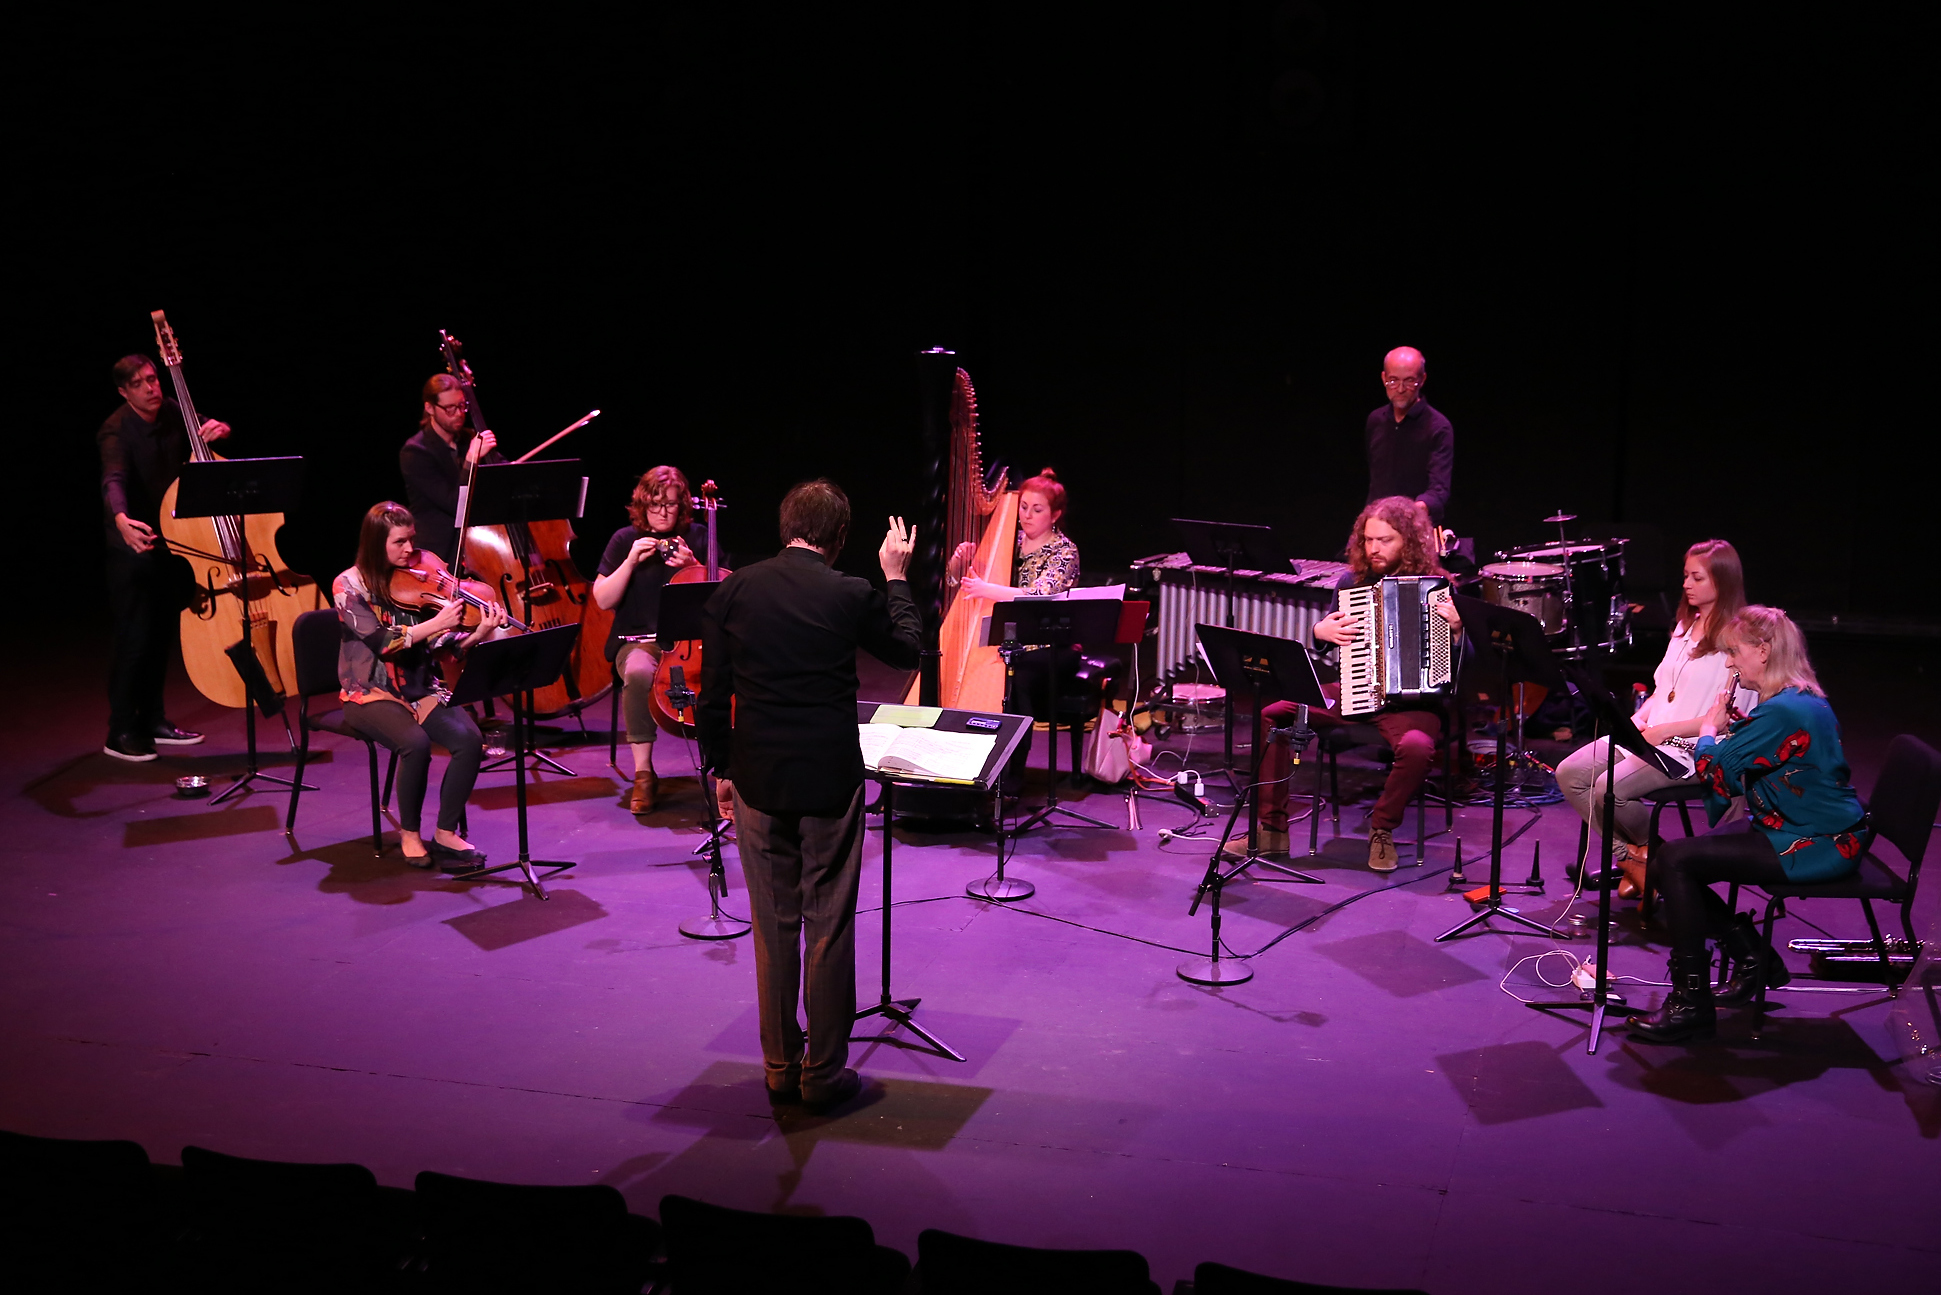 Bathed in violet light, an ensemble of musicians performs on a stage